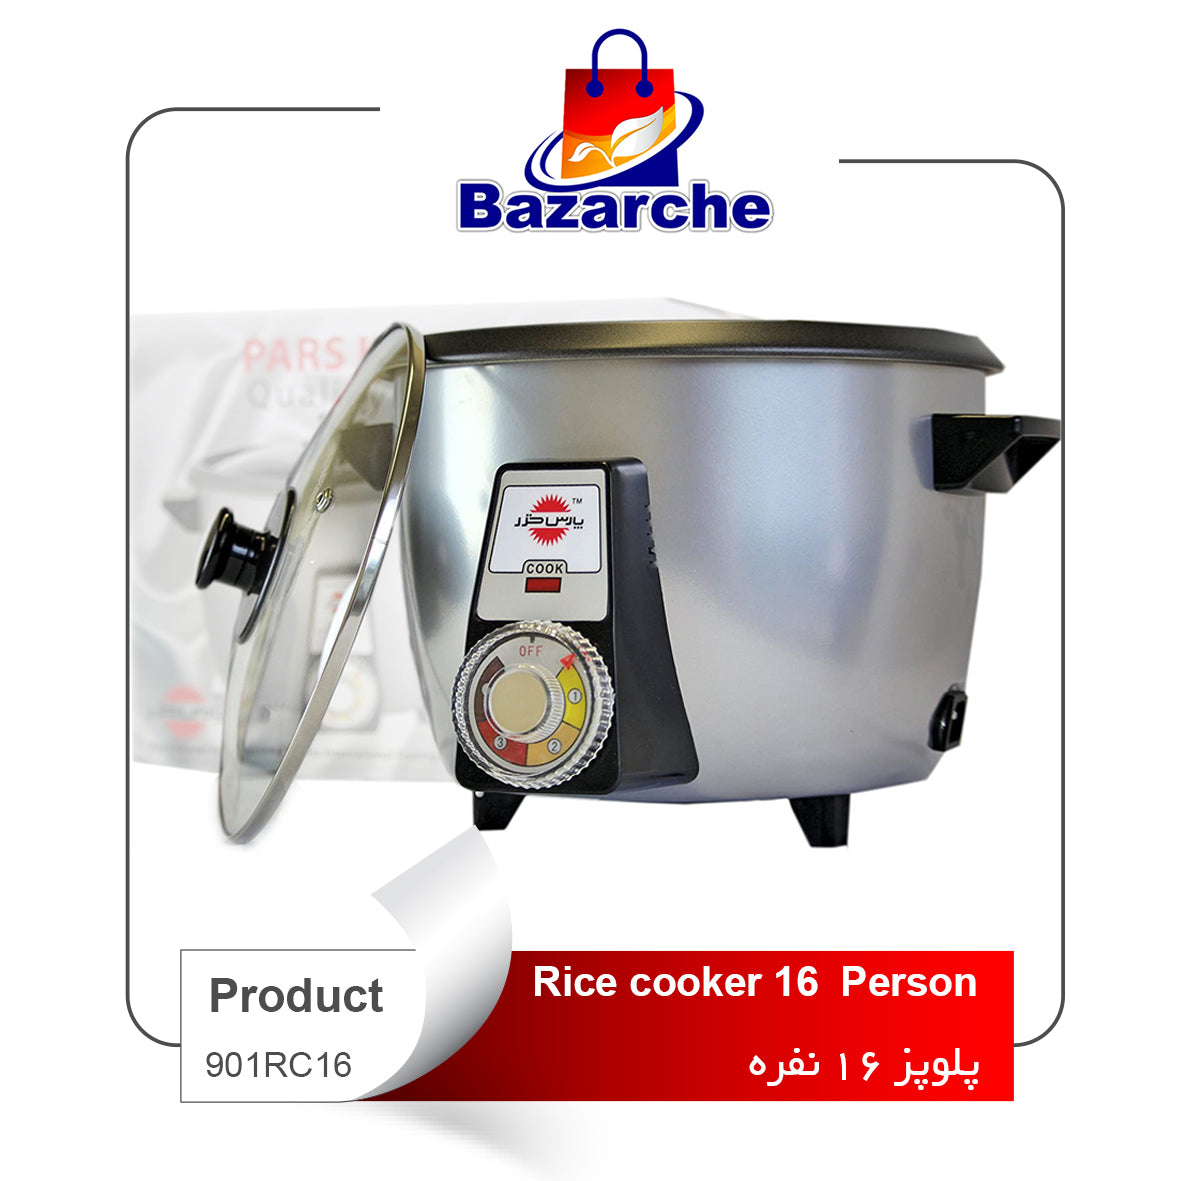 Rice cooker 16  Person(پلوپز۱۶نفره)